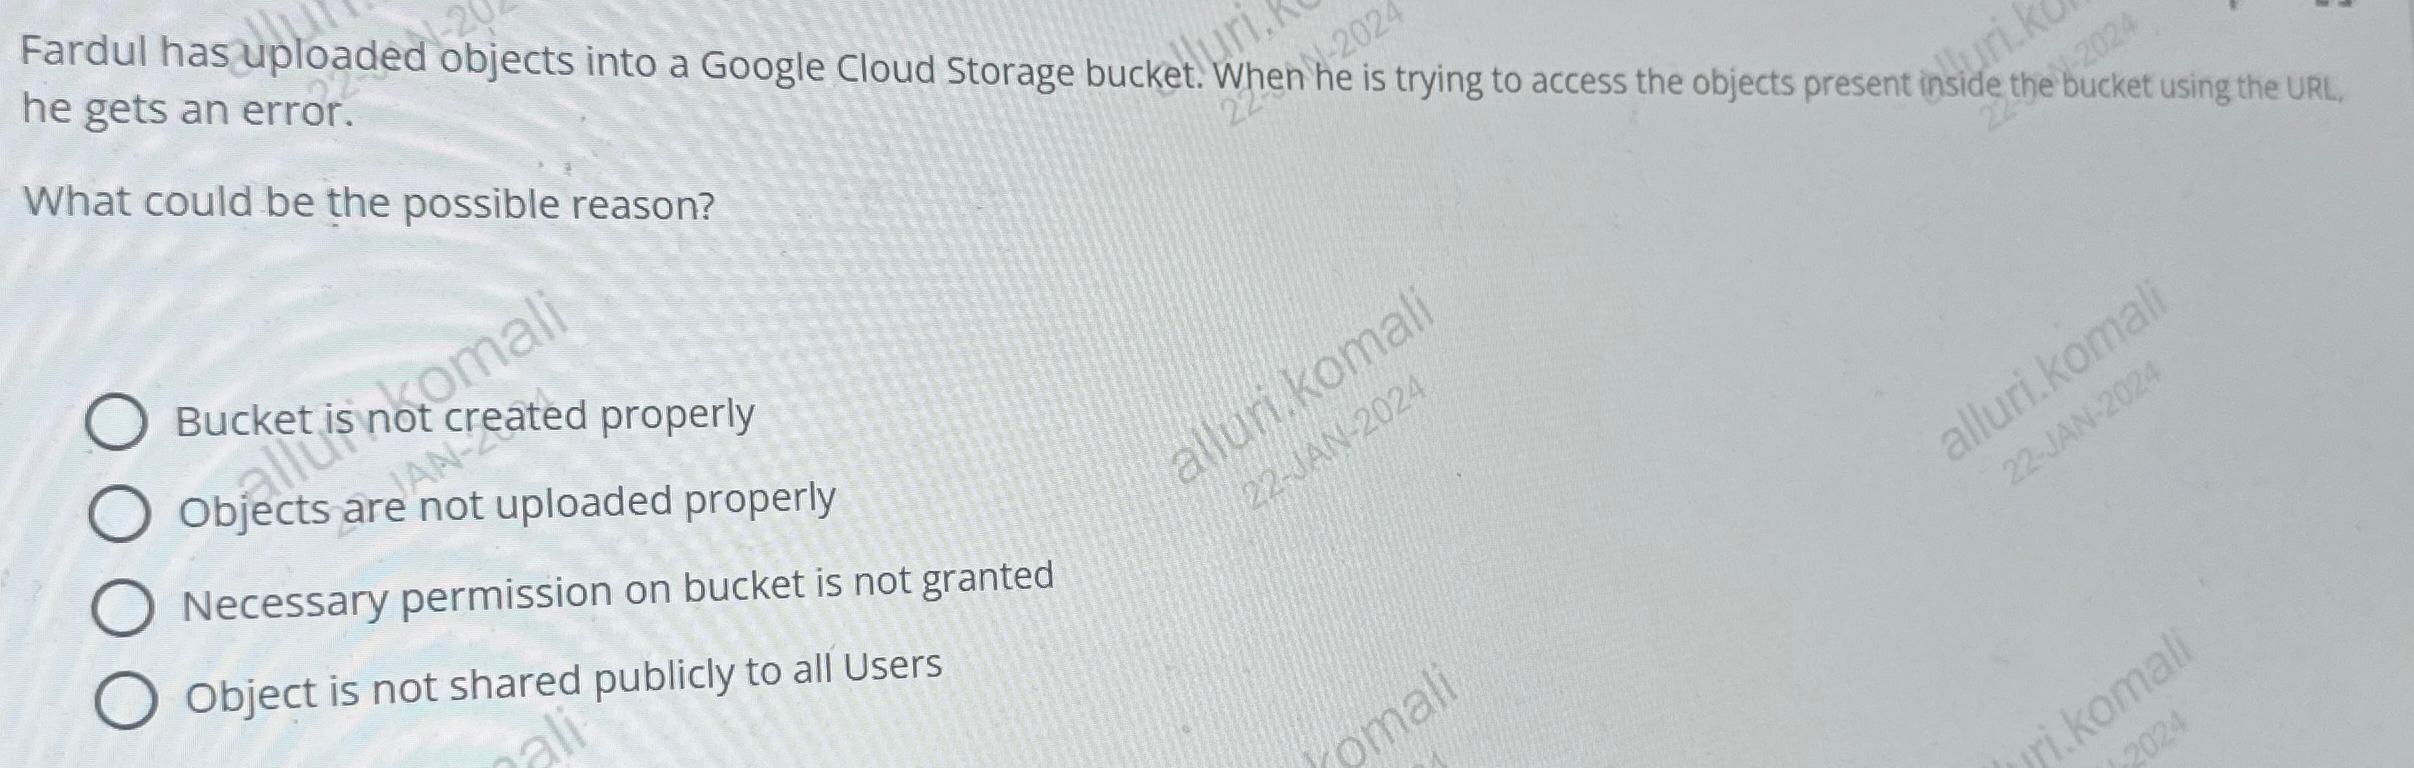 Fardul has uploaded objects into a Google Cloud Storage bucket. When he is trying to access the objects